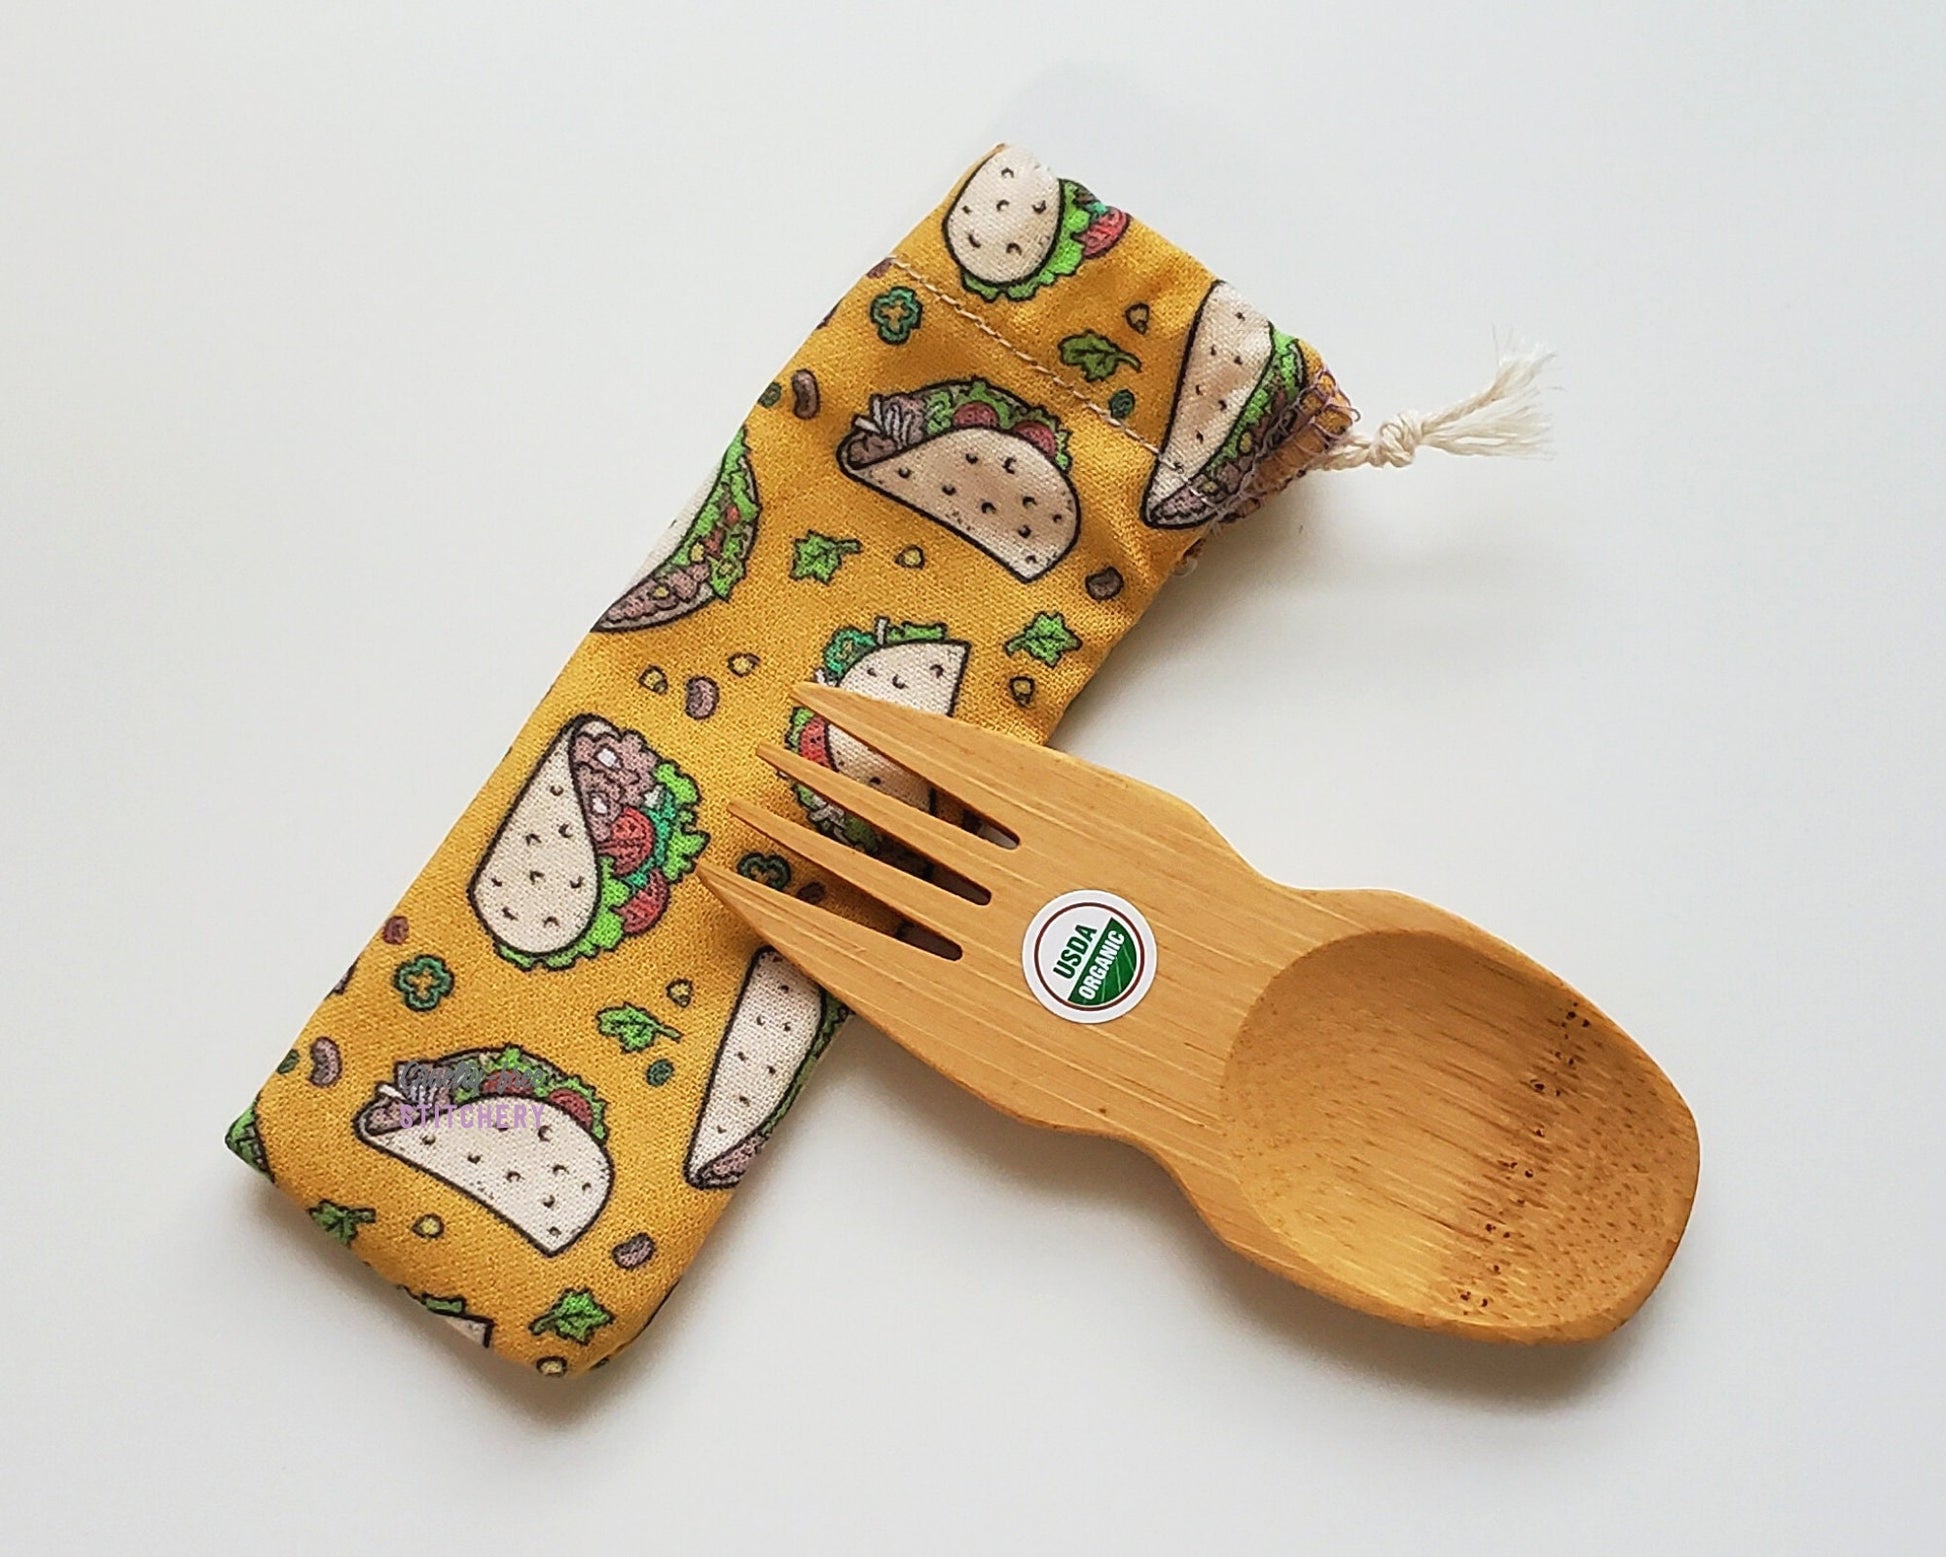 Reusable bamboo spork with pouch. The pouch is a mustard yellow fabric with small tacos printed on. The pouch is sitting diagonally with the spork partially on top pointing the other way. The spork is small, a double ended fork and spoon.